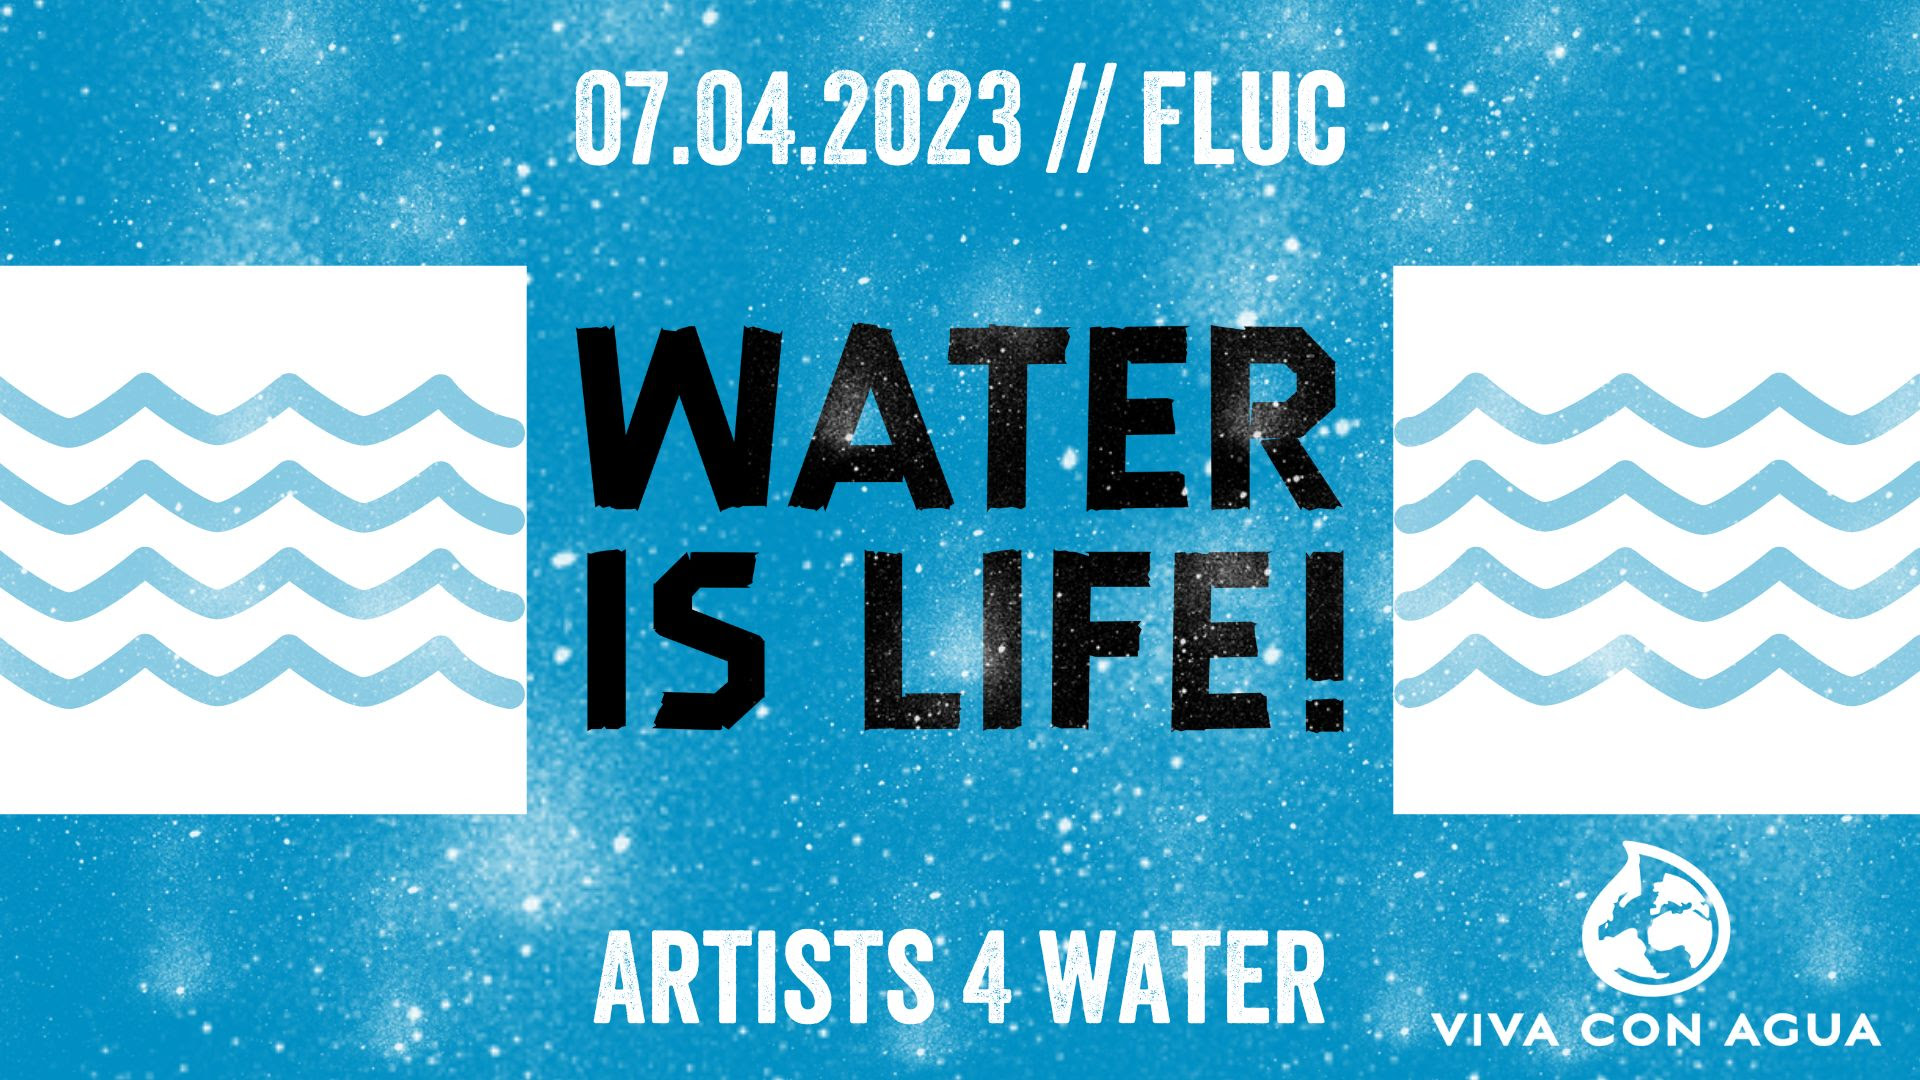 Water Is Life - Artists 4 Water am 7. April 2023 @ Fluc.